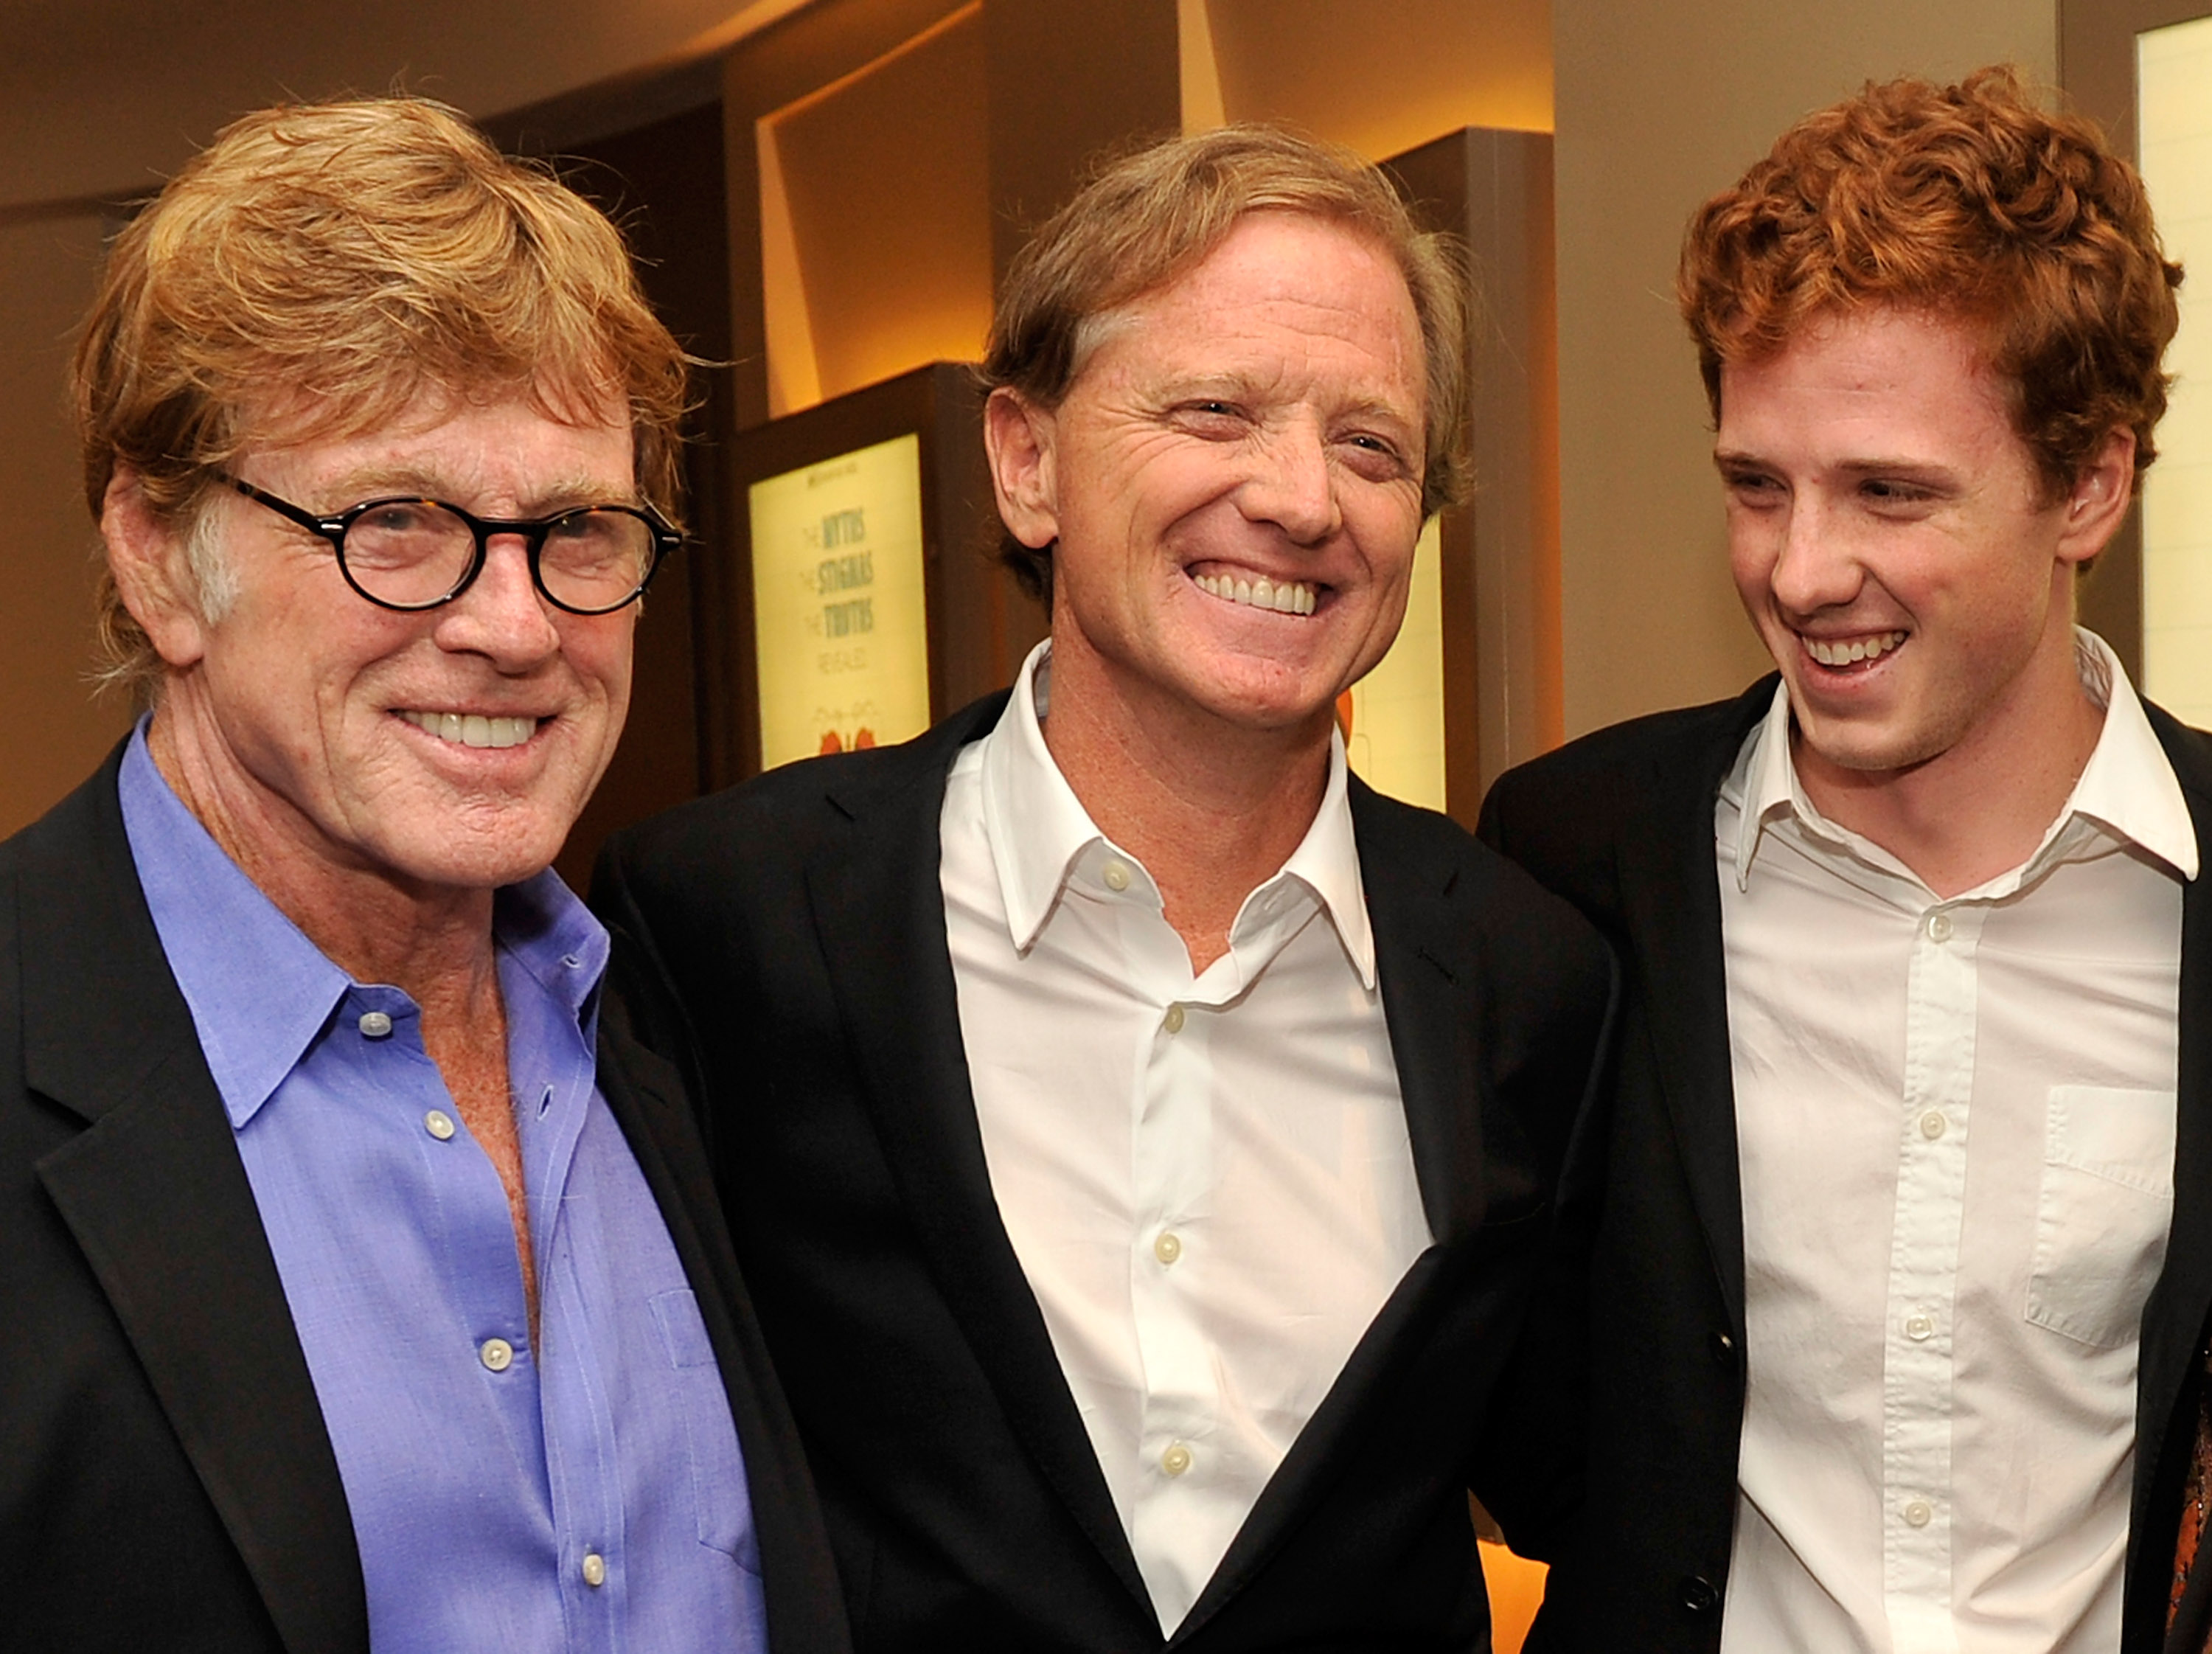 Robert Redford, James Redford, and Dylan Redford attend HBO's New York Premiere of "The Big Picture: Rethinking Dyslexia" in New York City on October 25, 2012. | Source: Getty Images